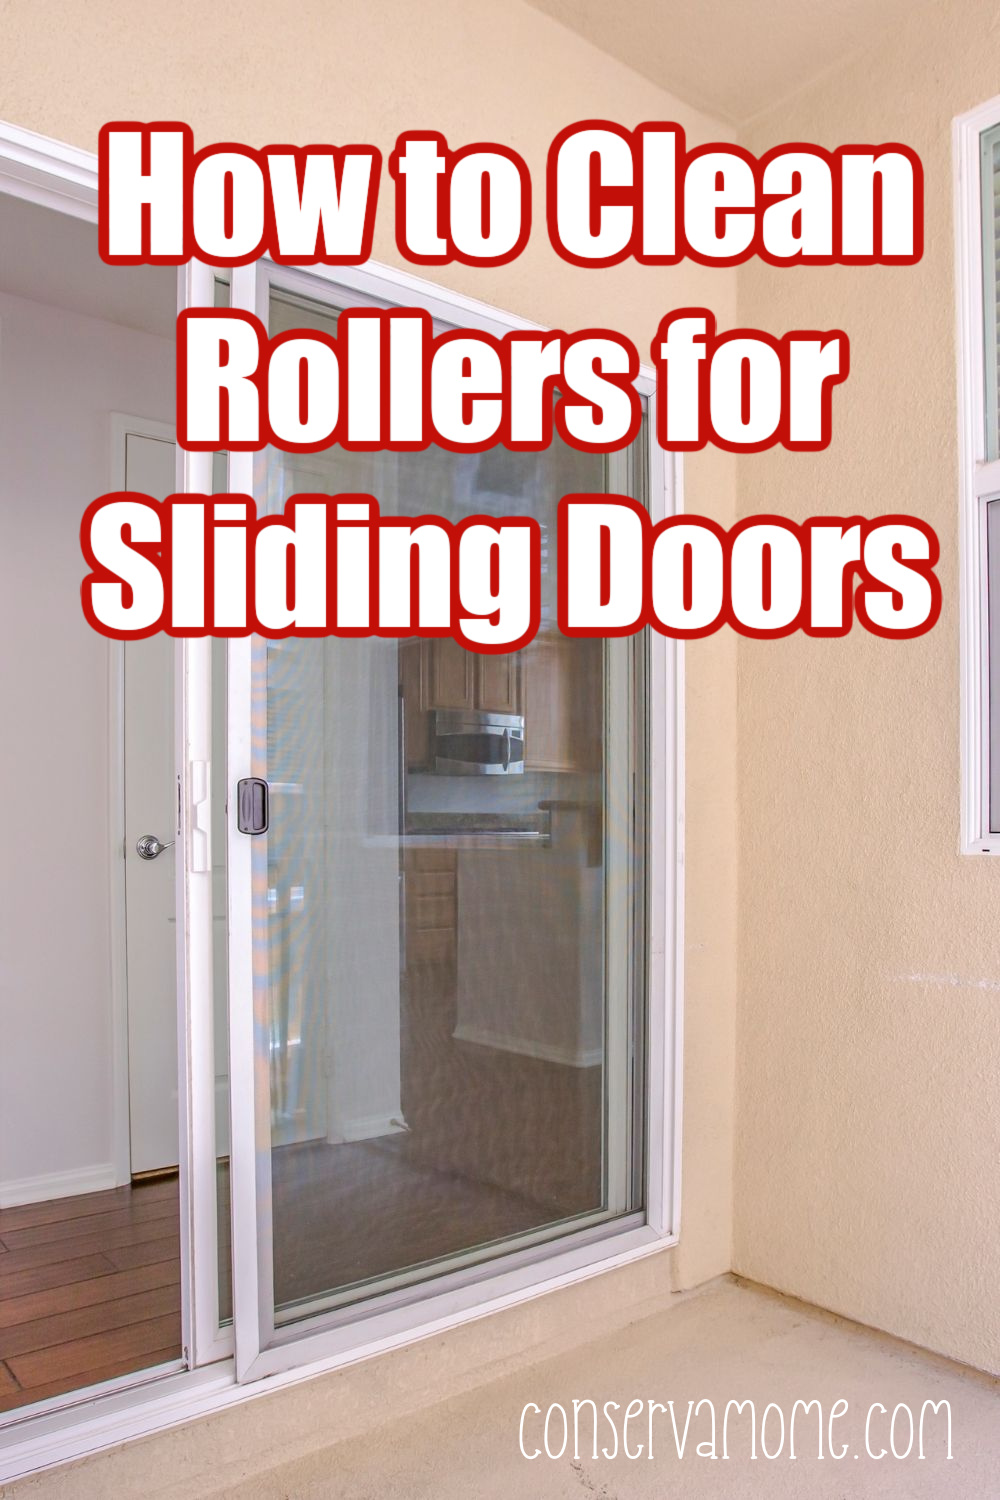 How to Clean Rollers for Sliding Doors